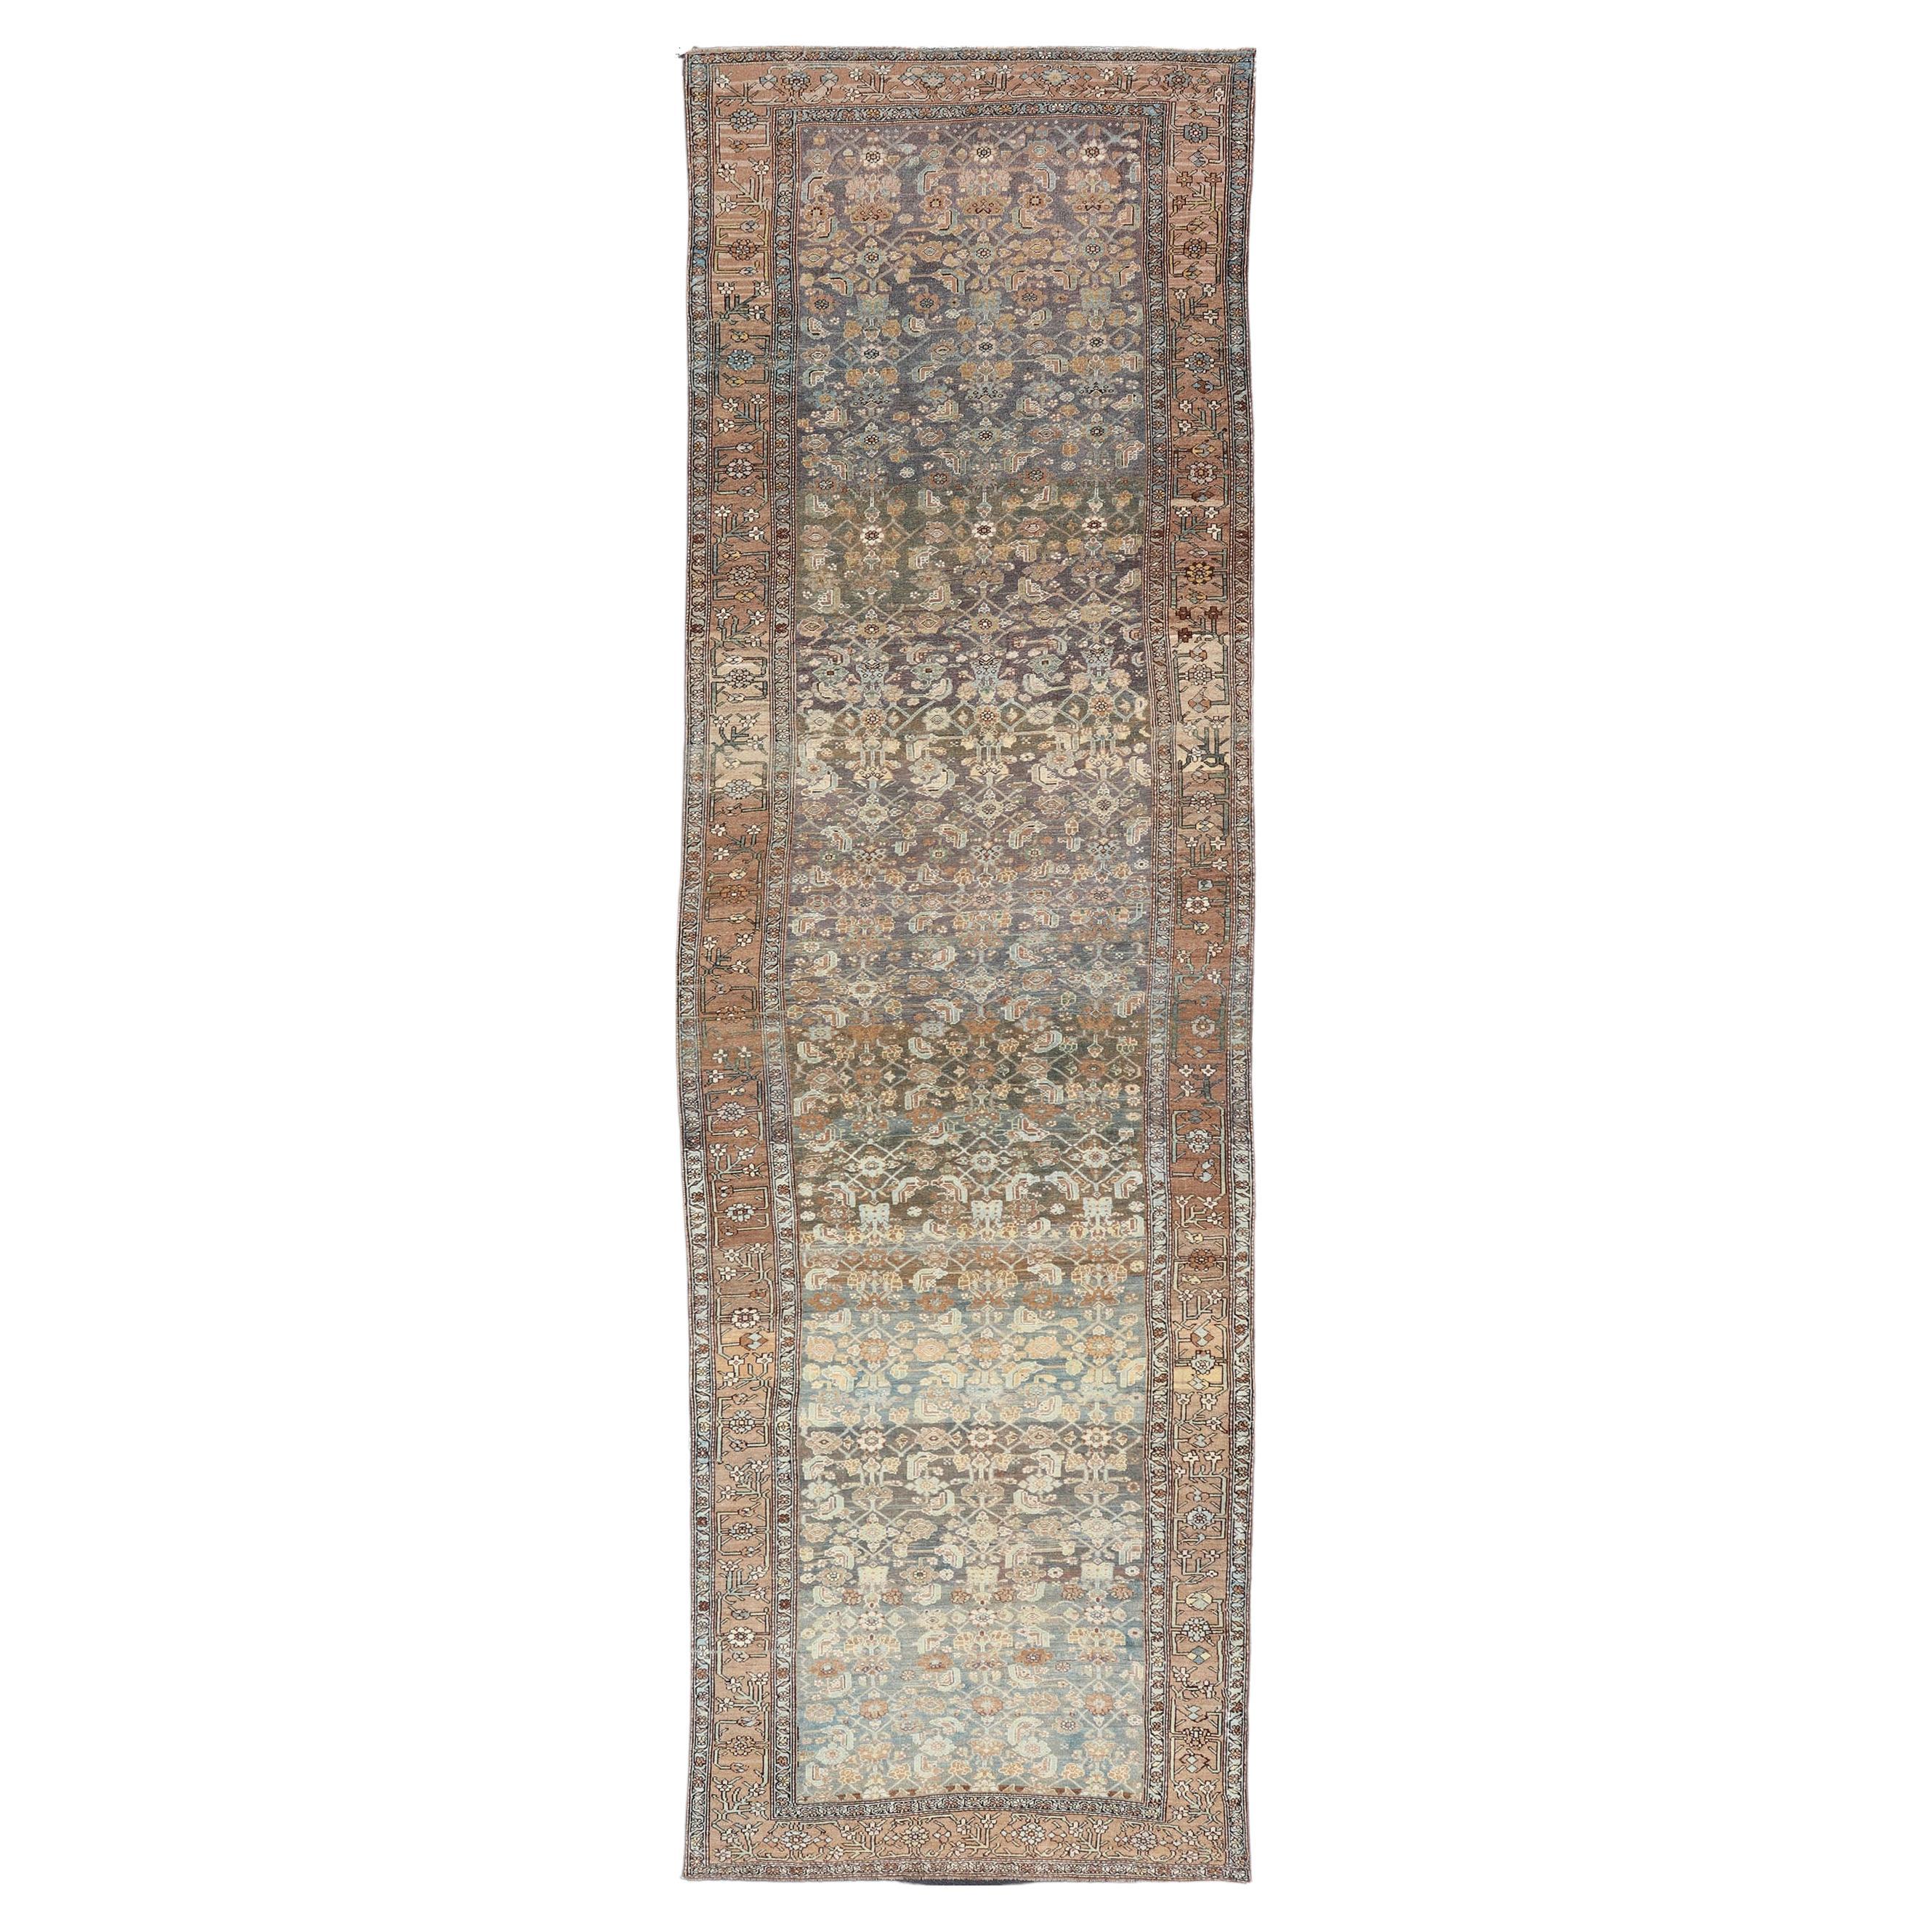 Late 19th Century Kurdish Antique All Over Design Gallery Runner in Muted Tones